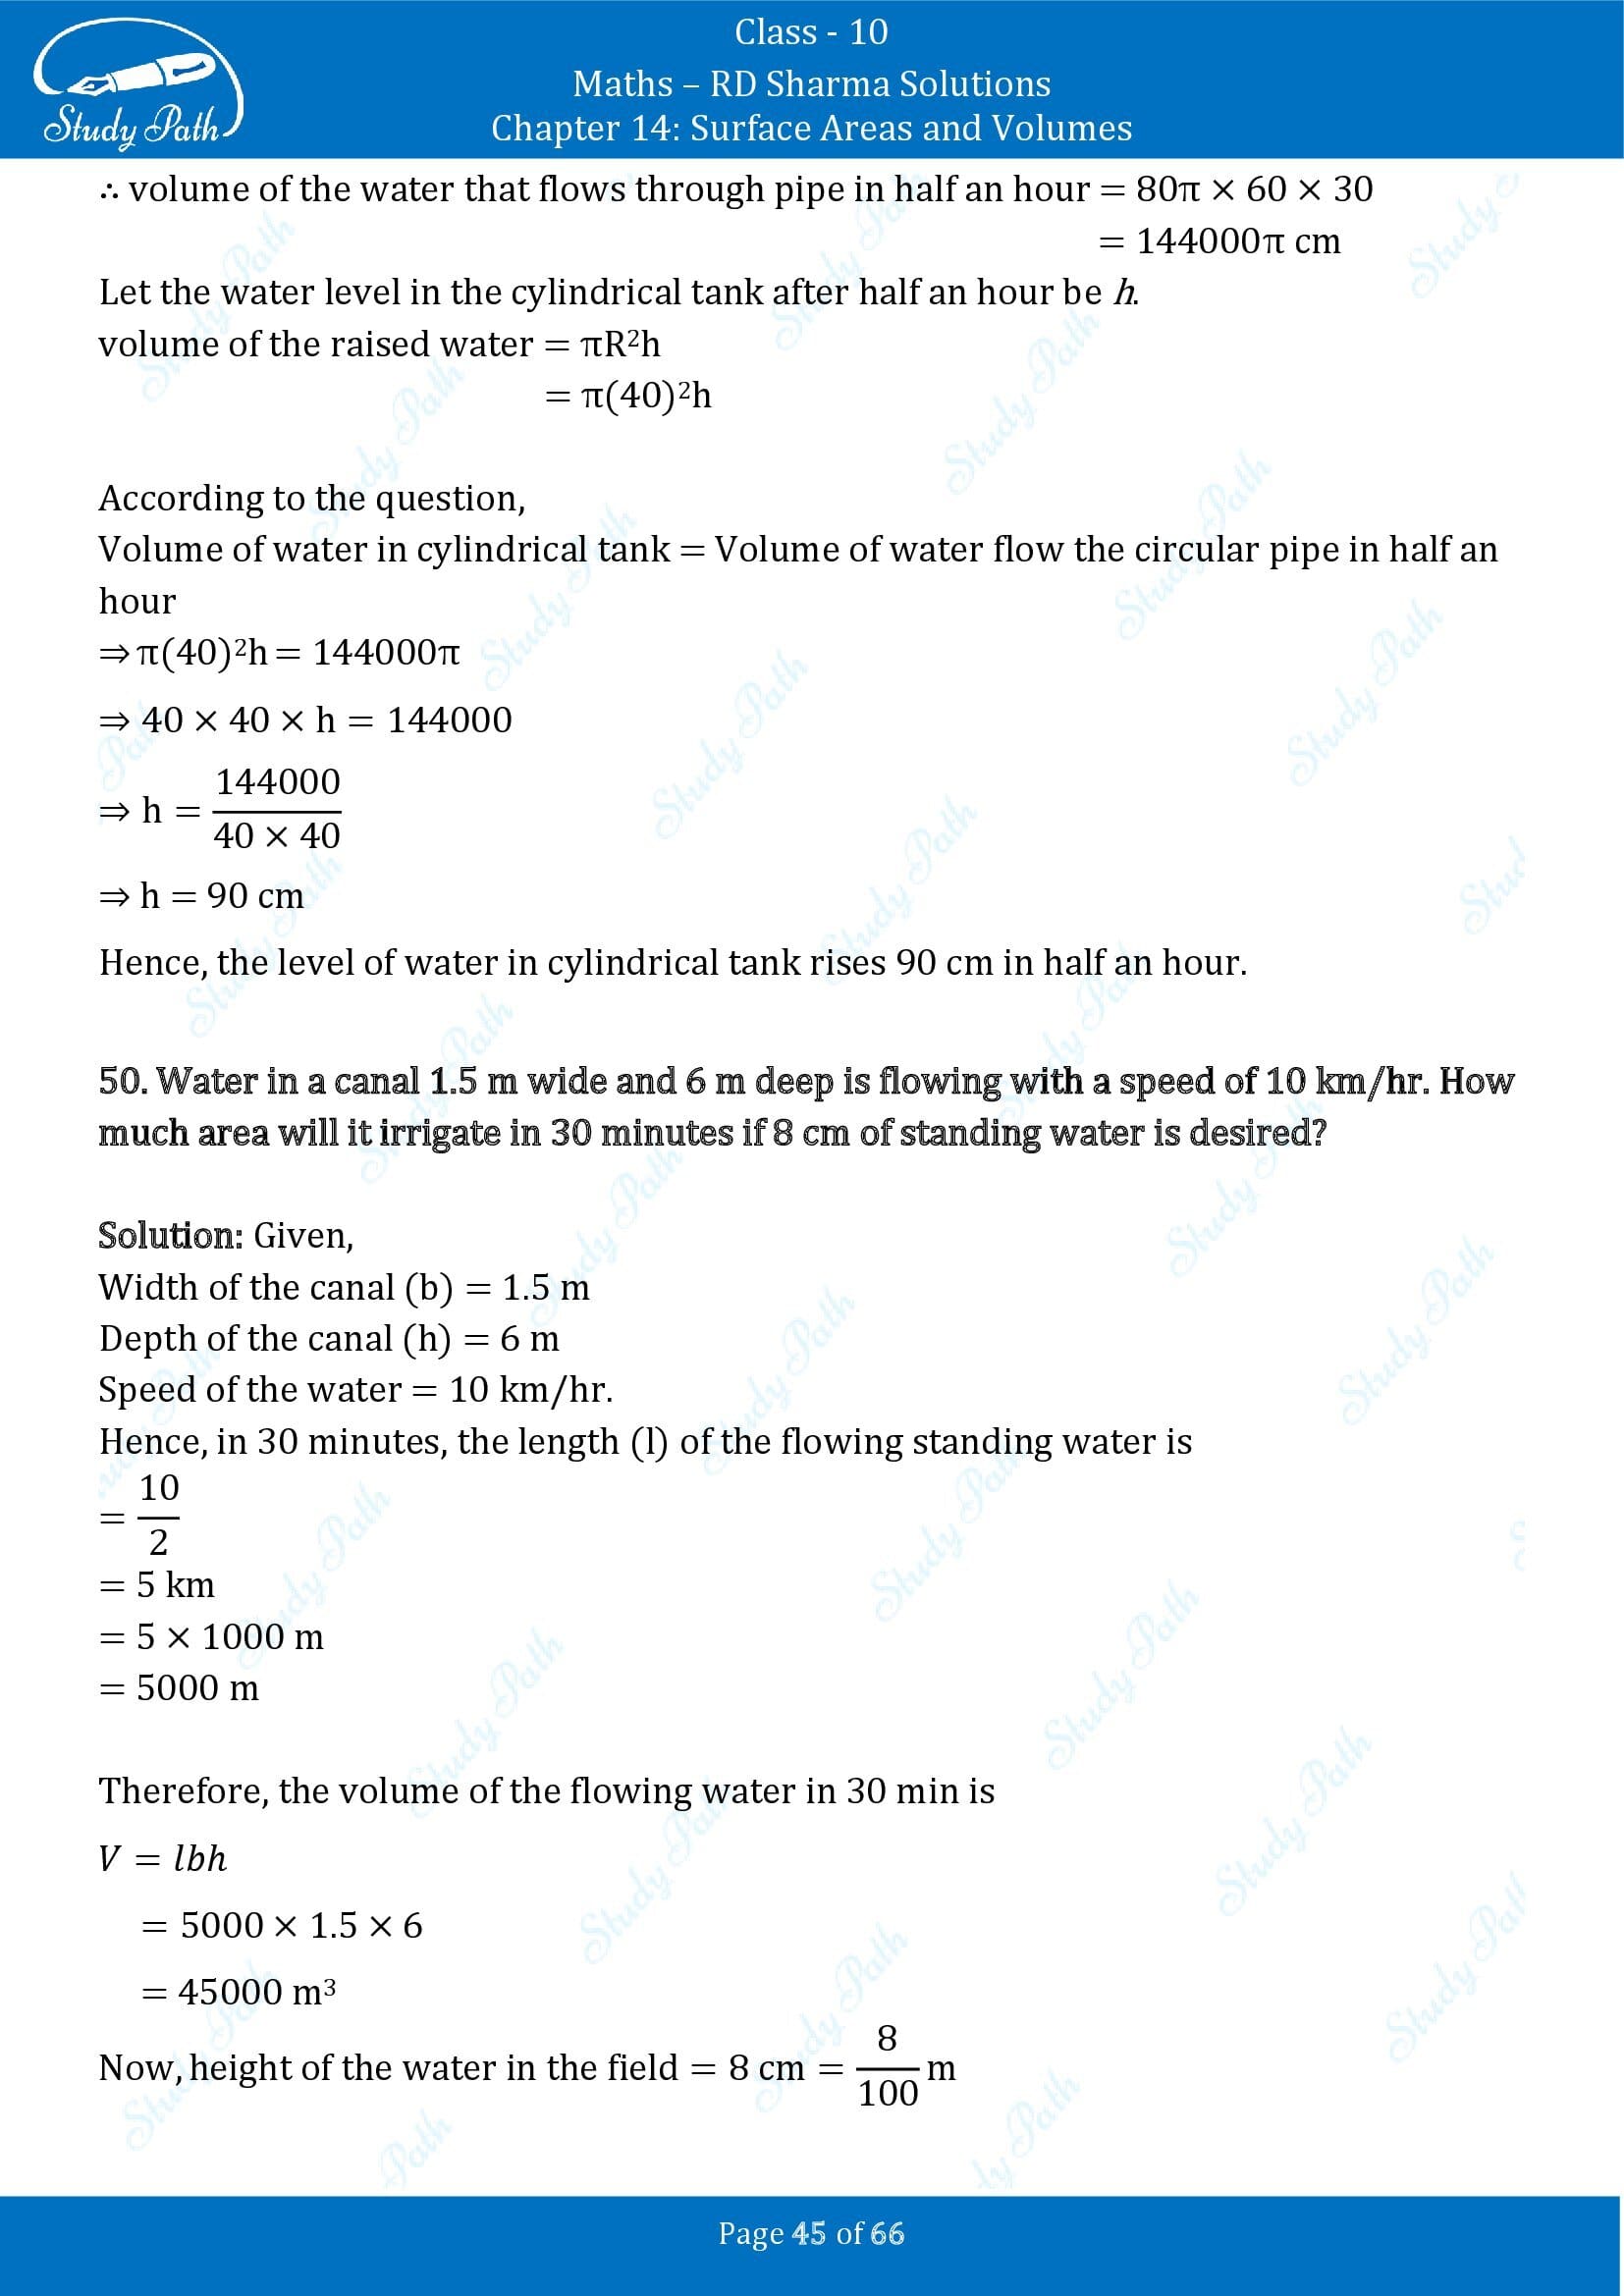 RD Sharma Solutions Class 10 Chapter 14 Surface Areas and Volumes Exercise 14.1 00045